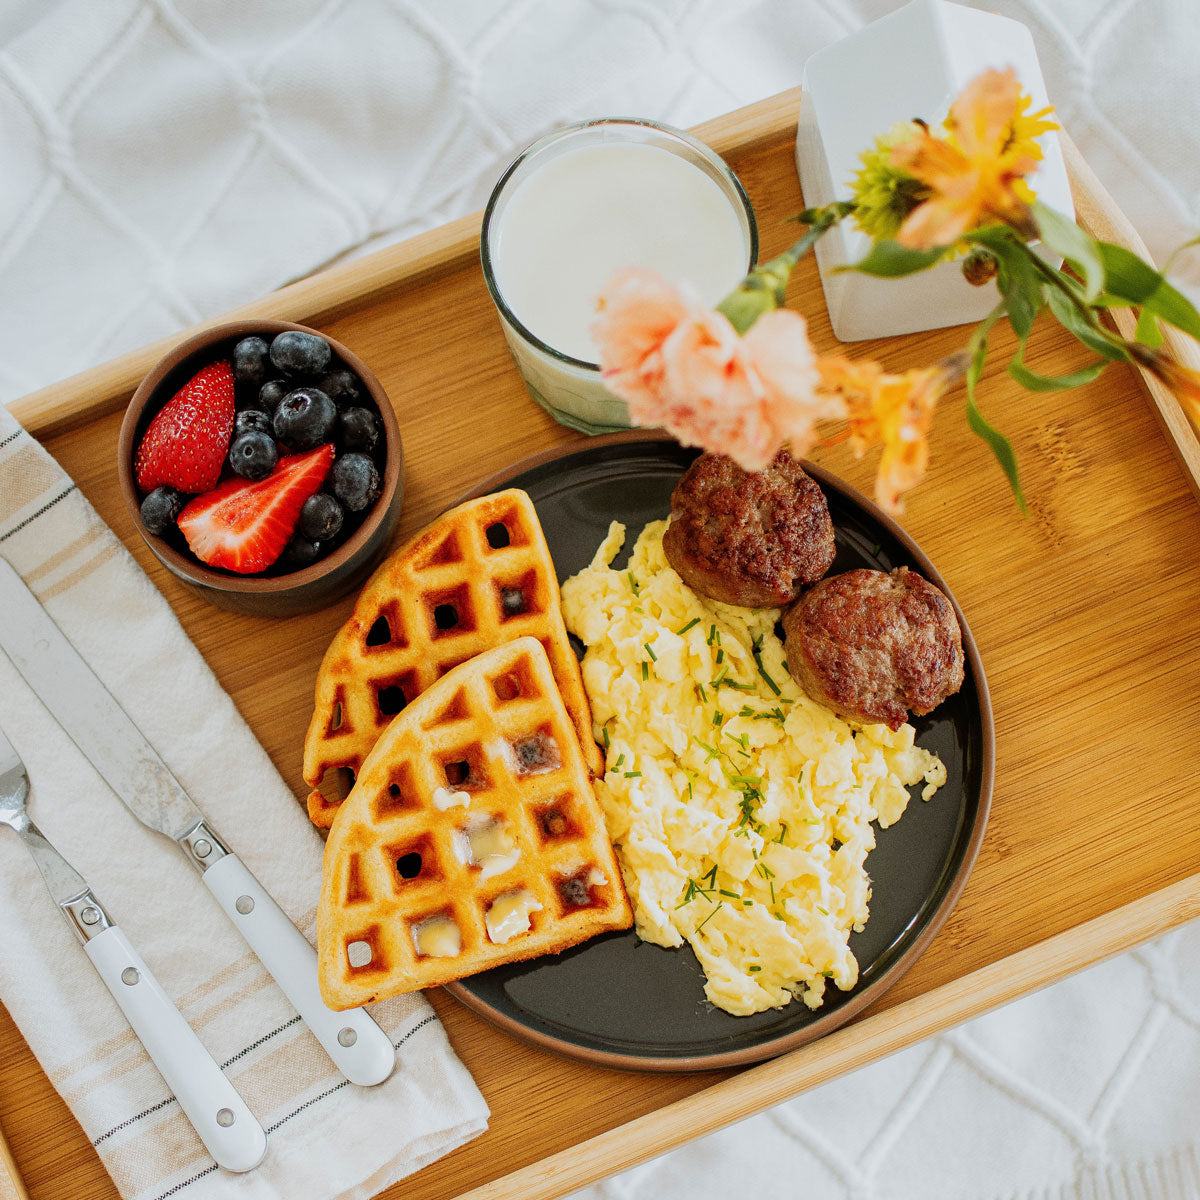 organic pork breakfast sausage on a plate with eggs and waffles on a tray with fruit, flowers, and milk